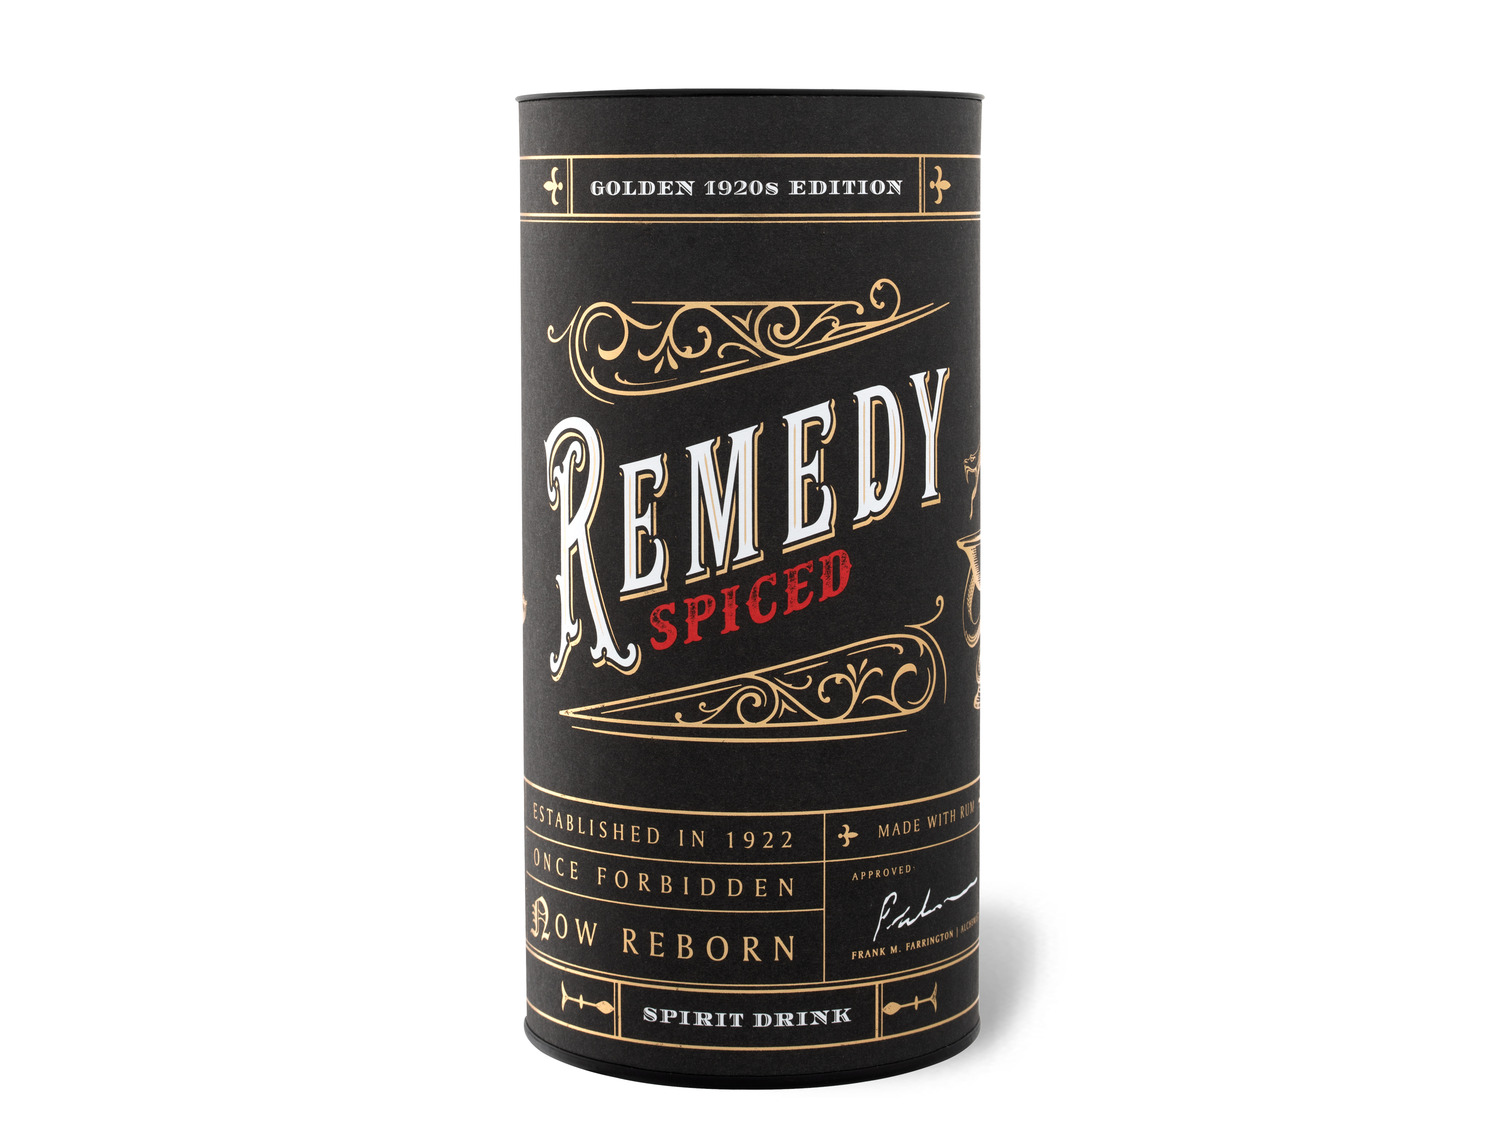 Edition Remedy Golden (Rum-Basis) mit 1920\'s Ge… Spiced